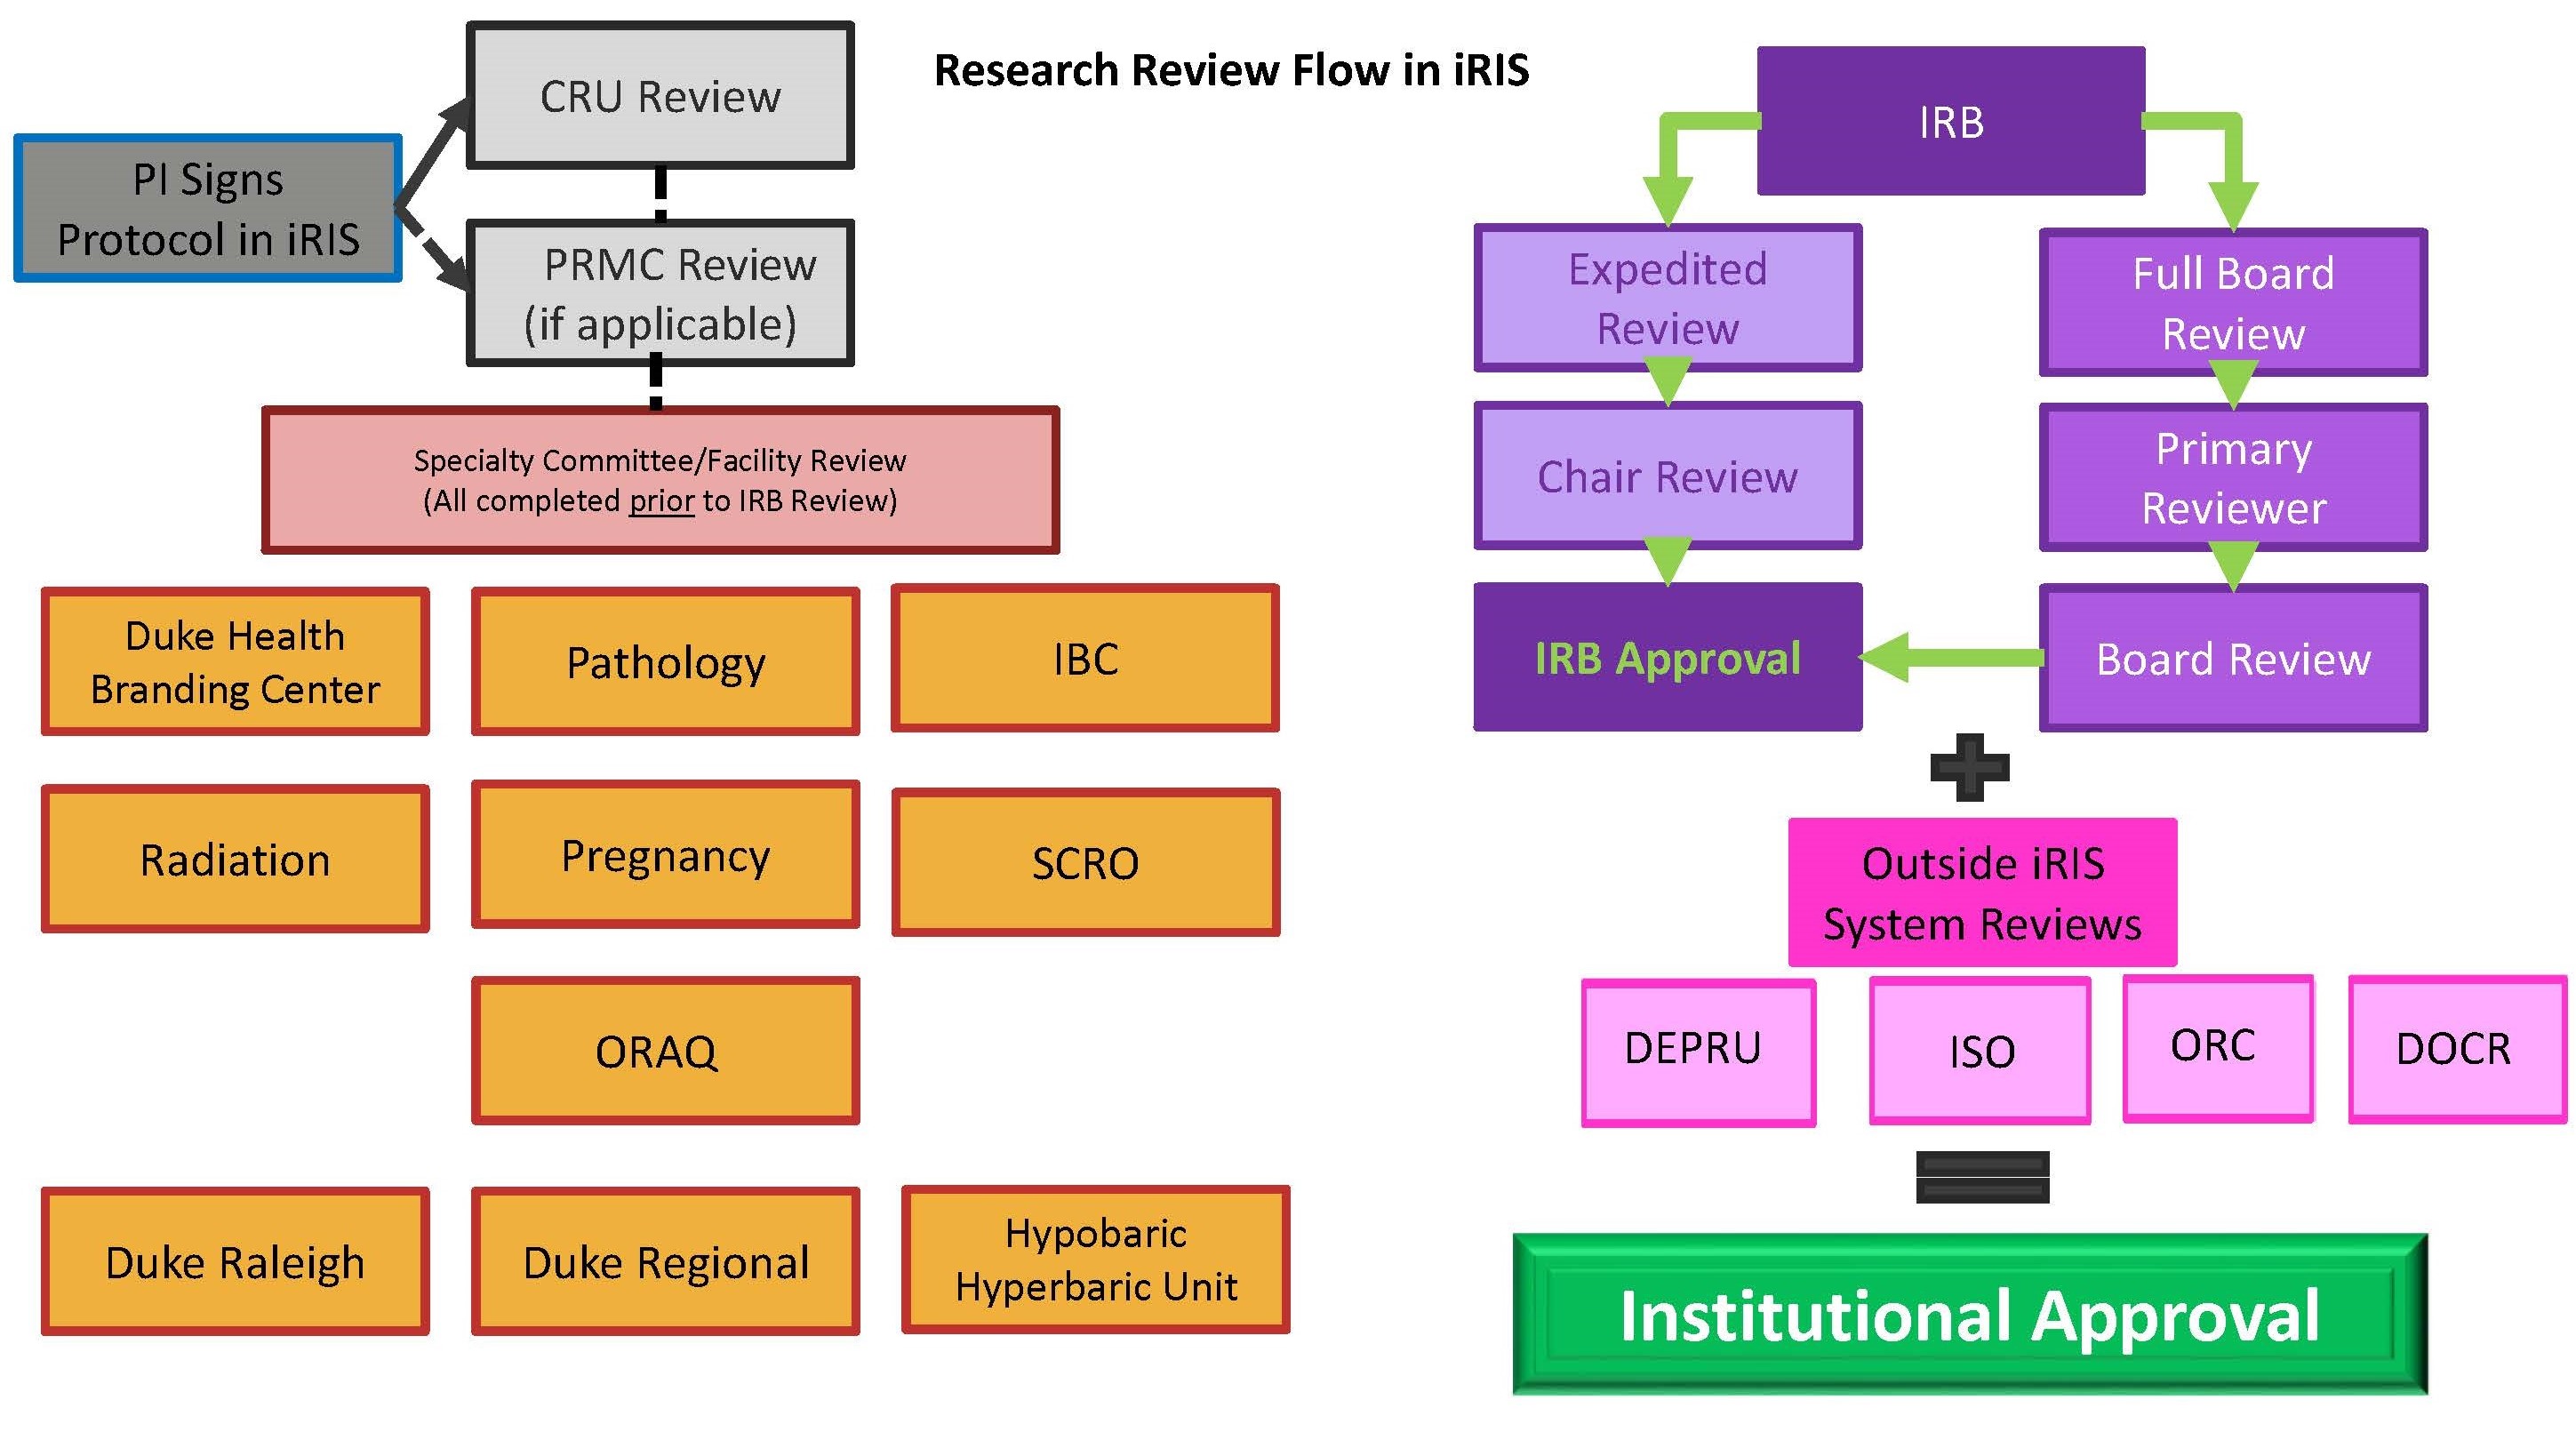 which research proposal would have to undergo irb review